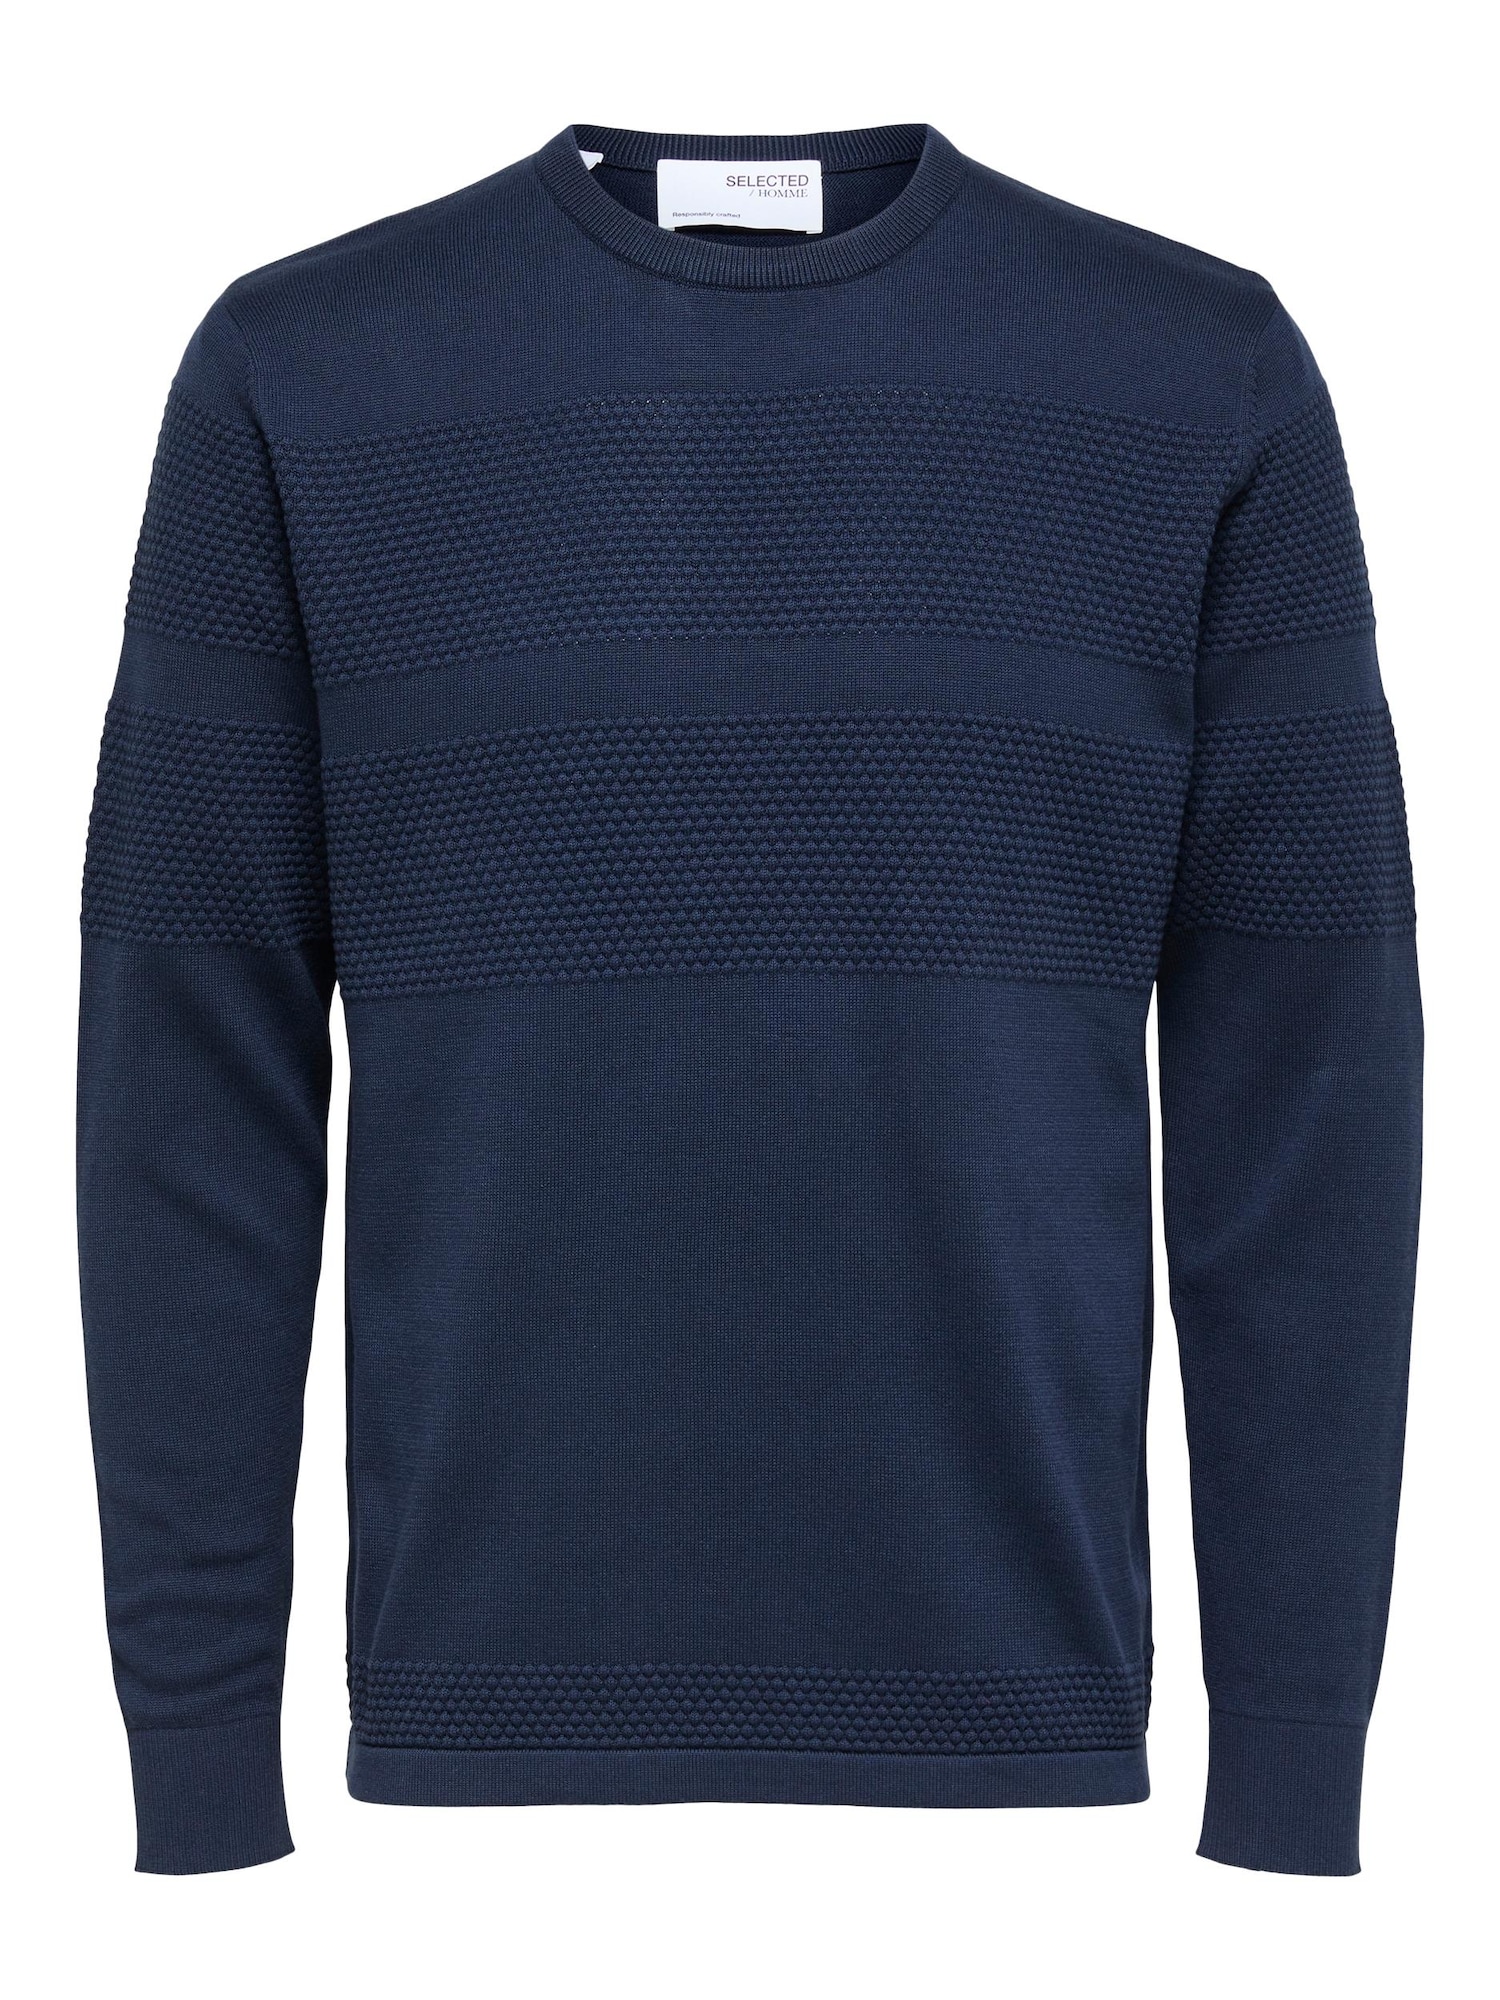 Pullover 'Maine' von Selected Homme